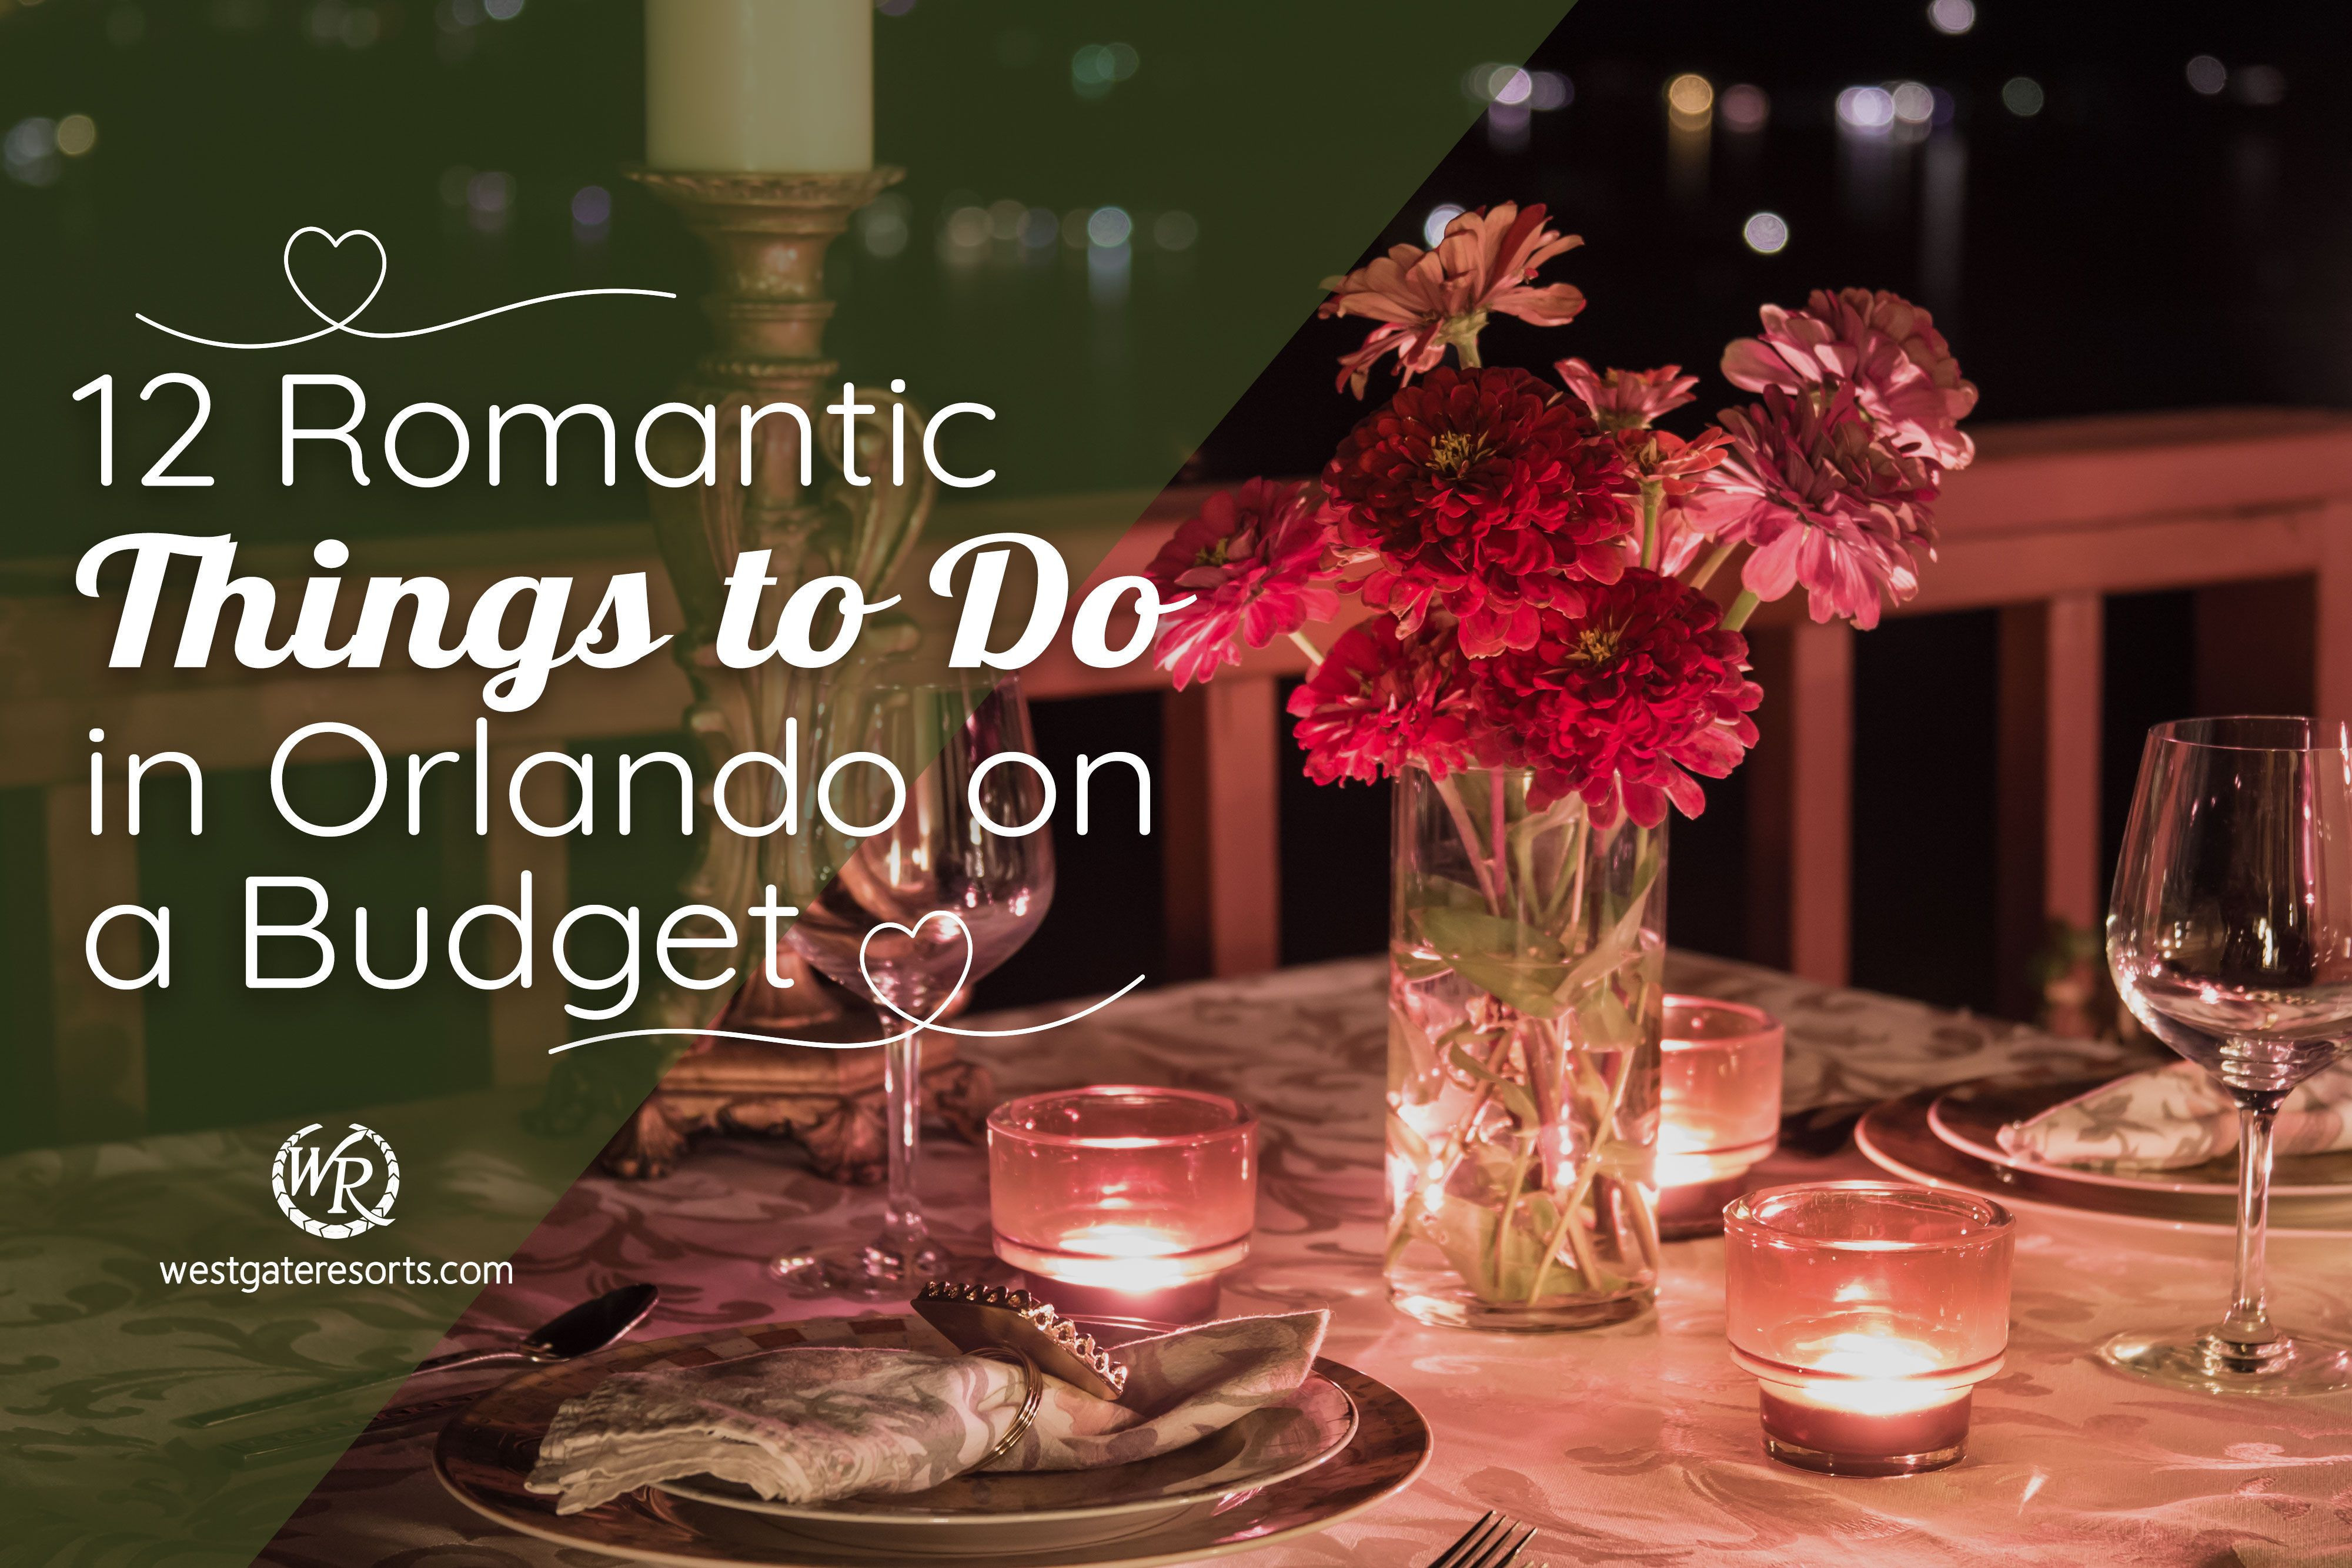 12 Romantic Things to Do in Orlando on a Budget